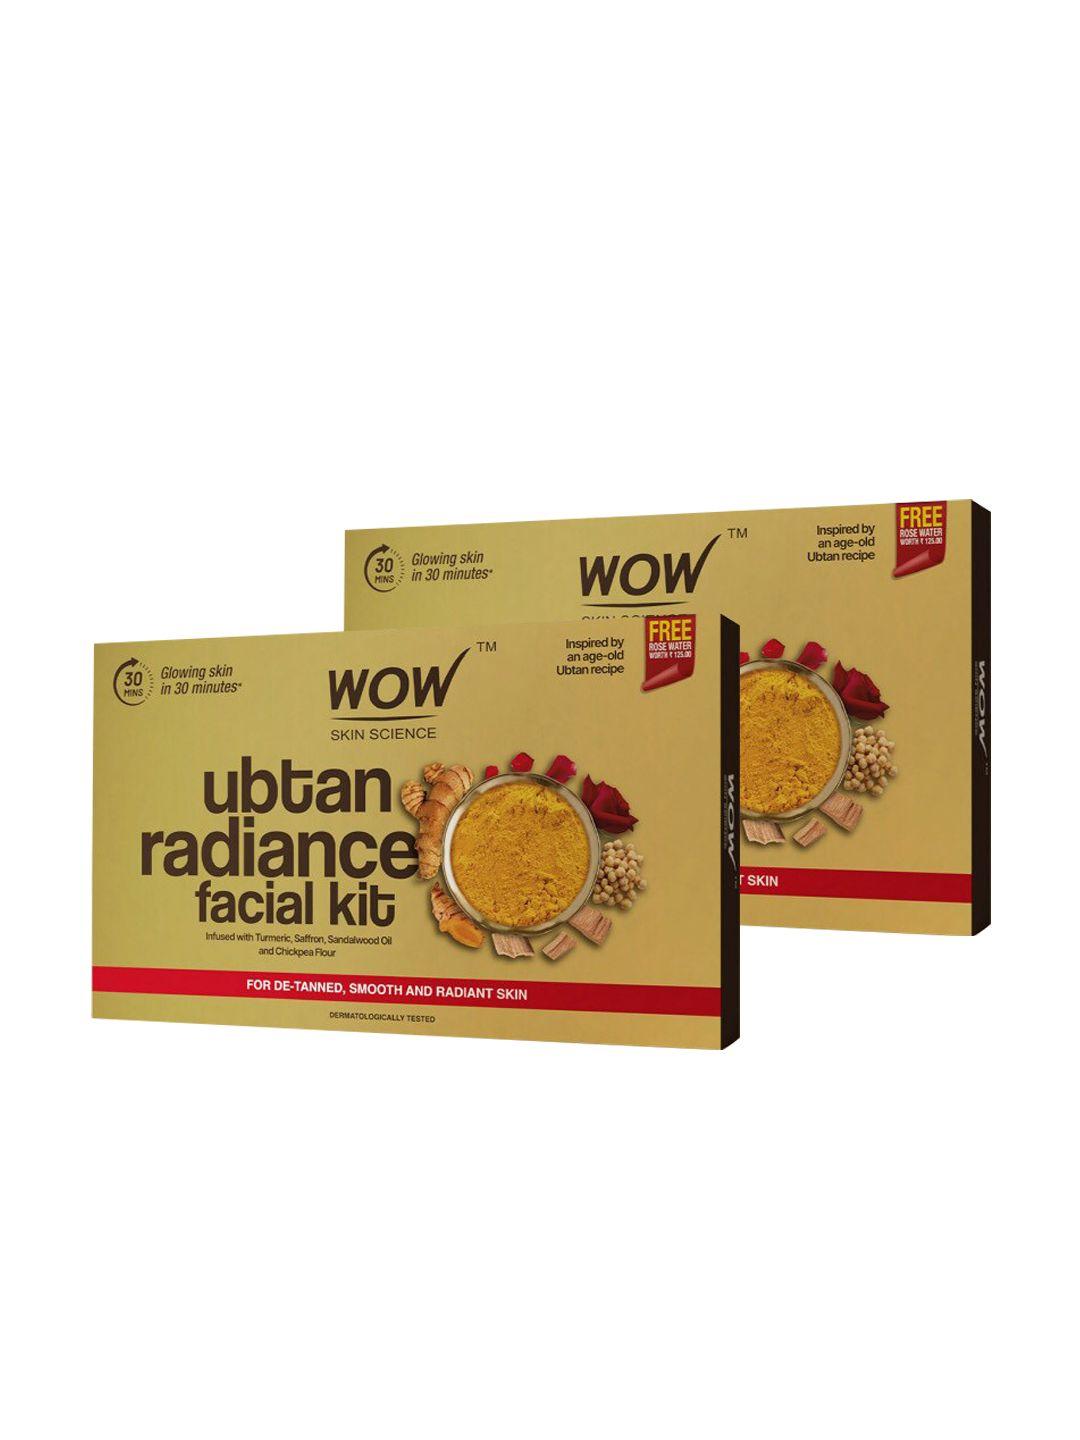 wow-skin-science-pack-of-2-ubtan-radiance-facial-kit-for-glowing-skin-with-free-rose-water